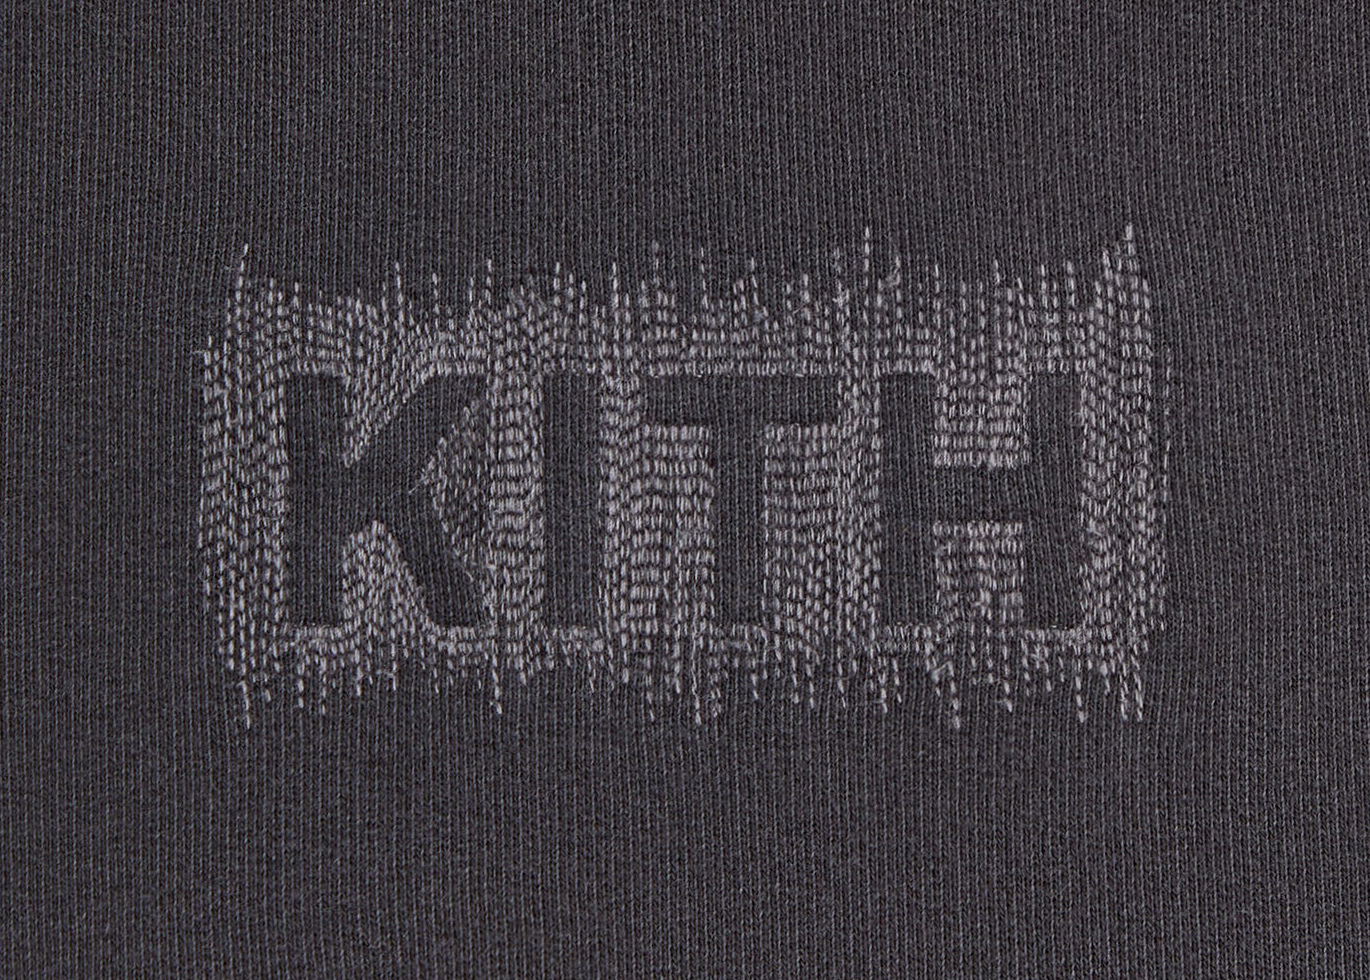 FEAKith Stitch Classic Logo Nelson Hoodie